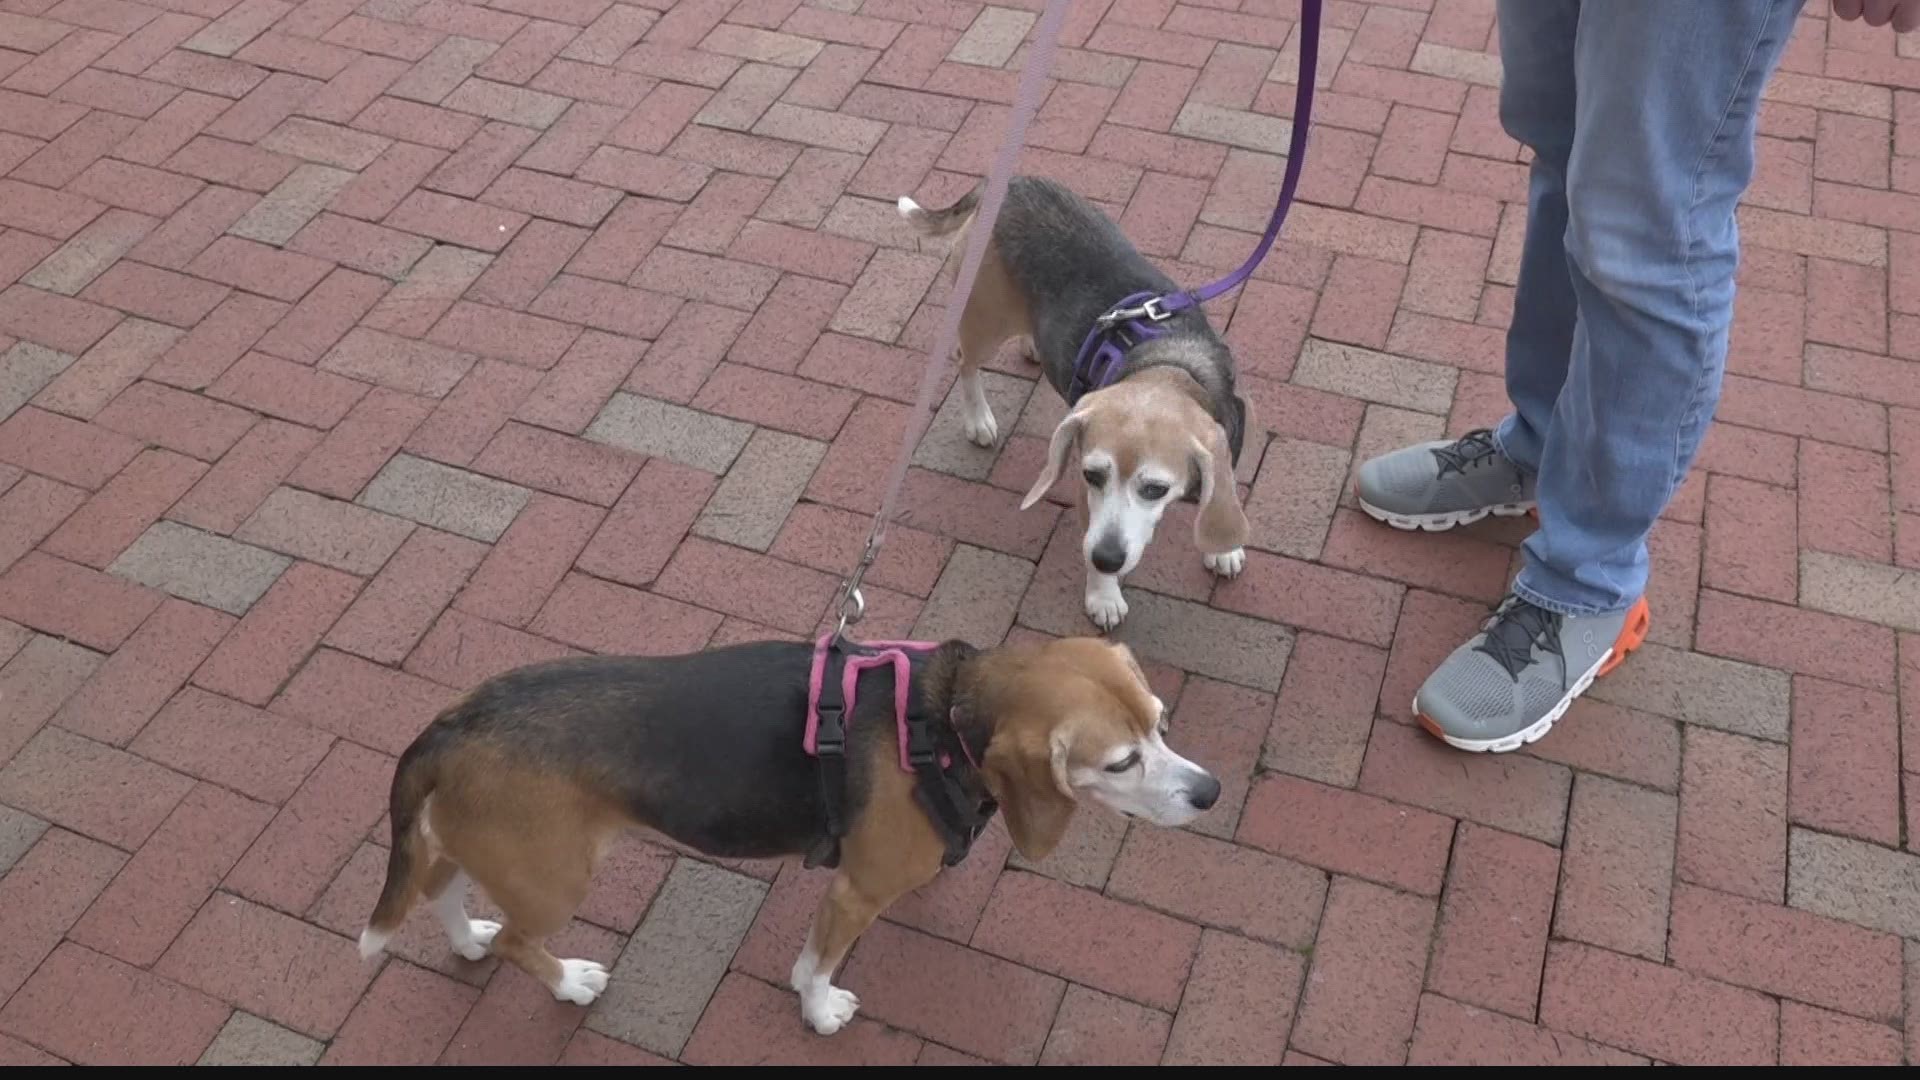 This daily event at the Huntsville Botanical Garden allows people and their pups to not only get some exercise, but to connect with nature.